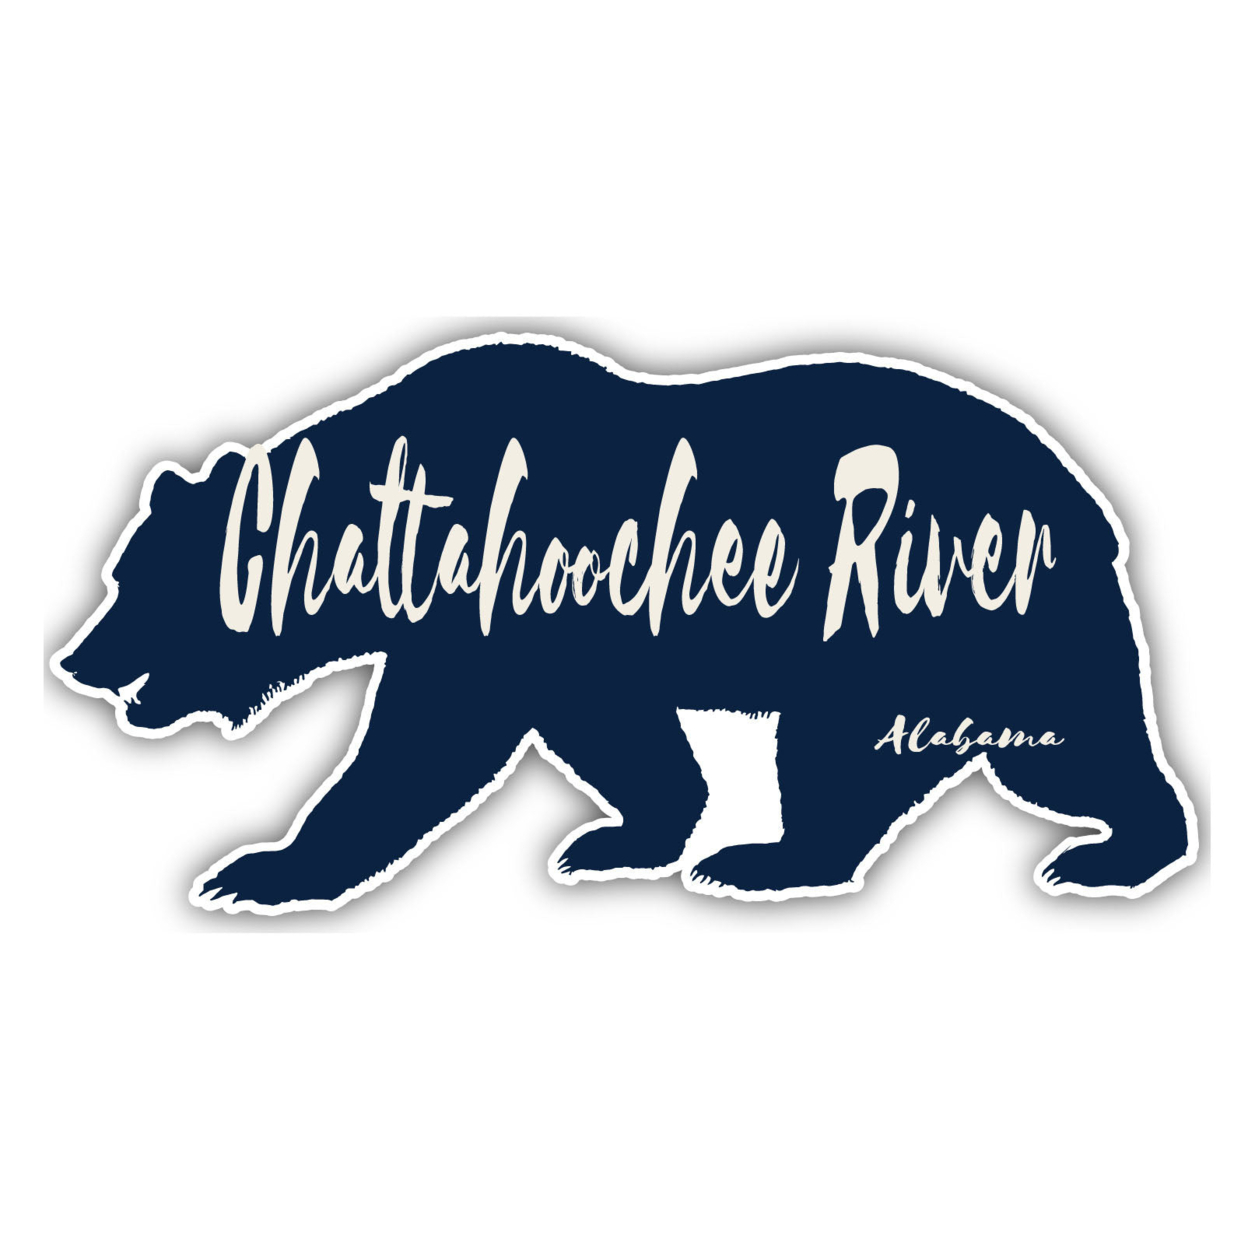 Chattahoochee River Alabama Souvenir Decorative Stickers (Choose Theme And Size) - 4-Pack, 12-Inch, Bear